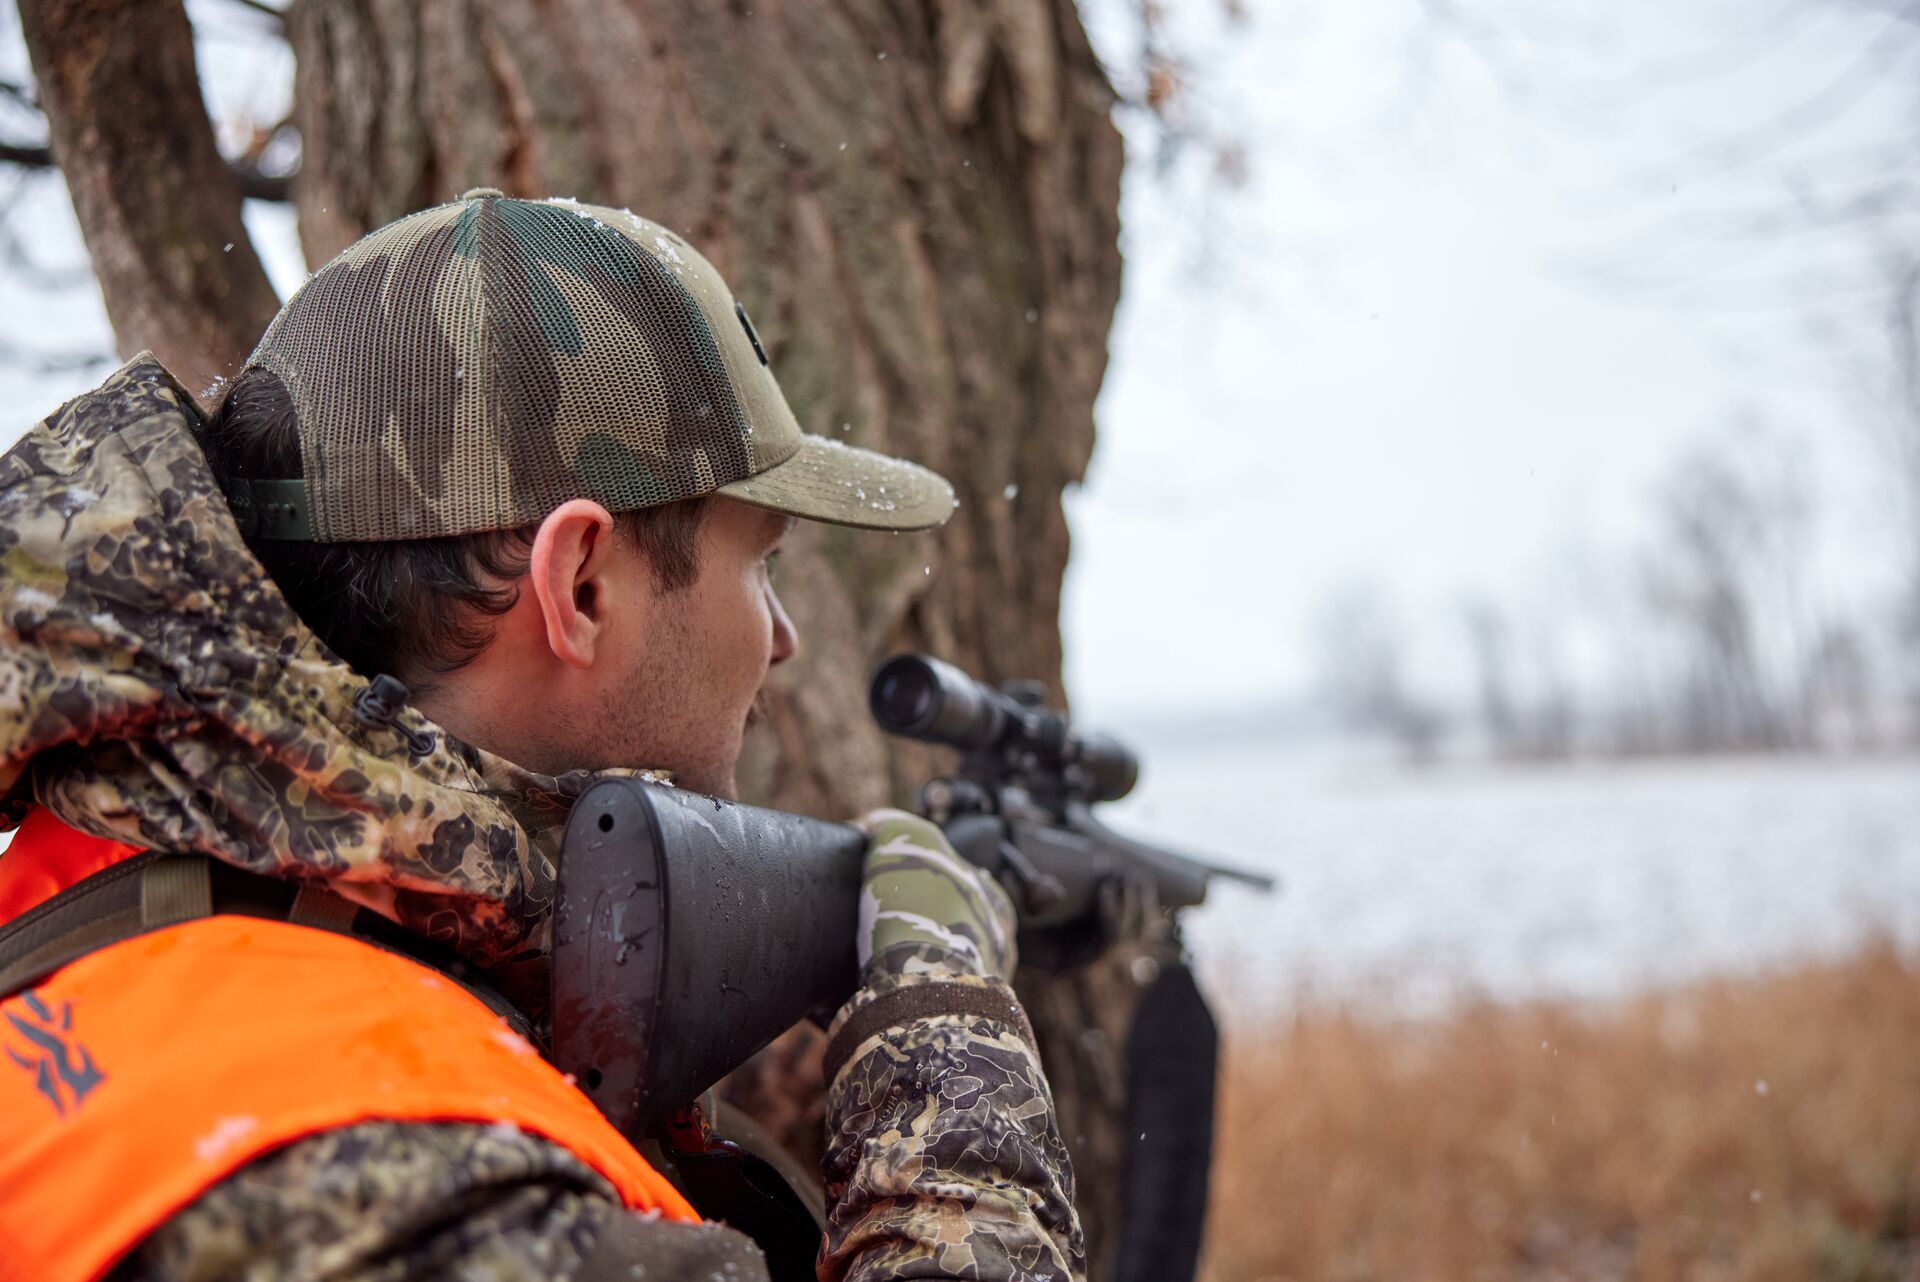 A hunter sighting in a rifle, trophy bucks concept. 